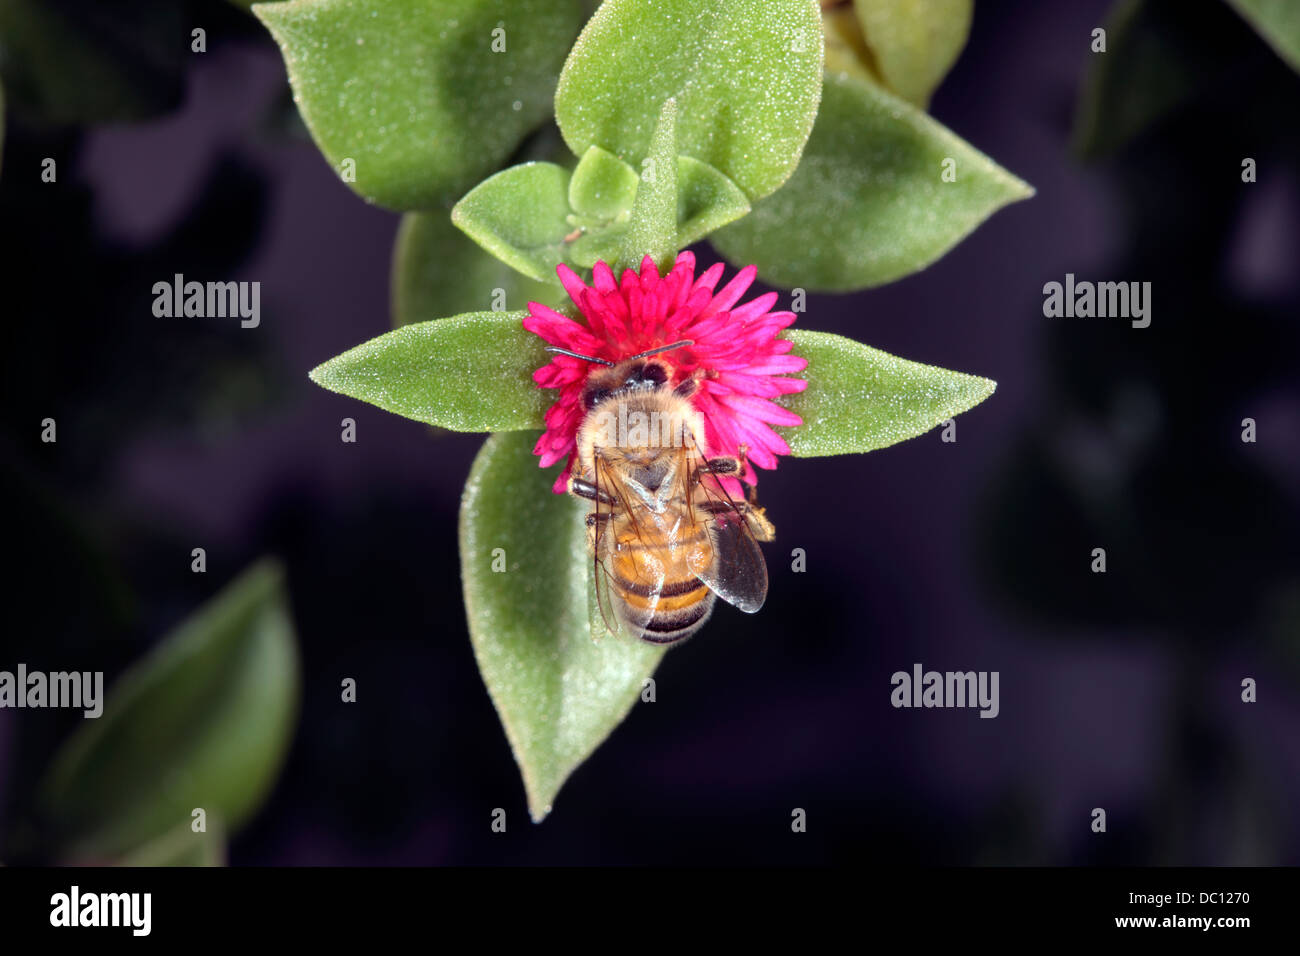 Honey bee {Apis mellifera] collecting pollen from a Trailing Ice Plant/ Vygie Lampranthus flower- Family Aizoaceae Stock Photo